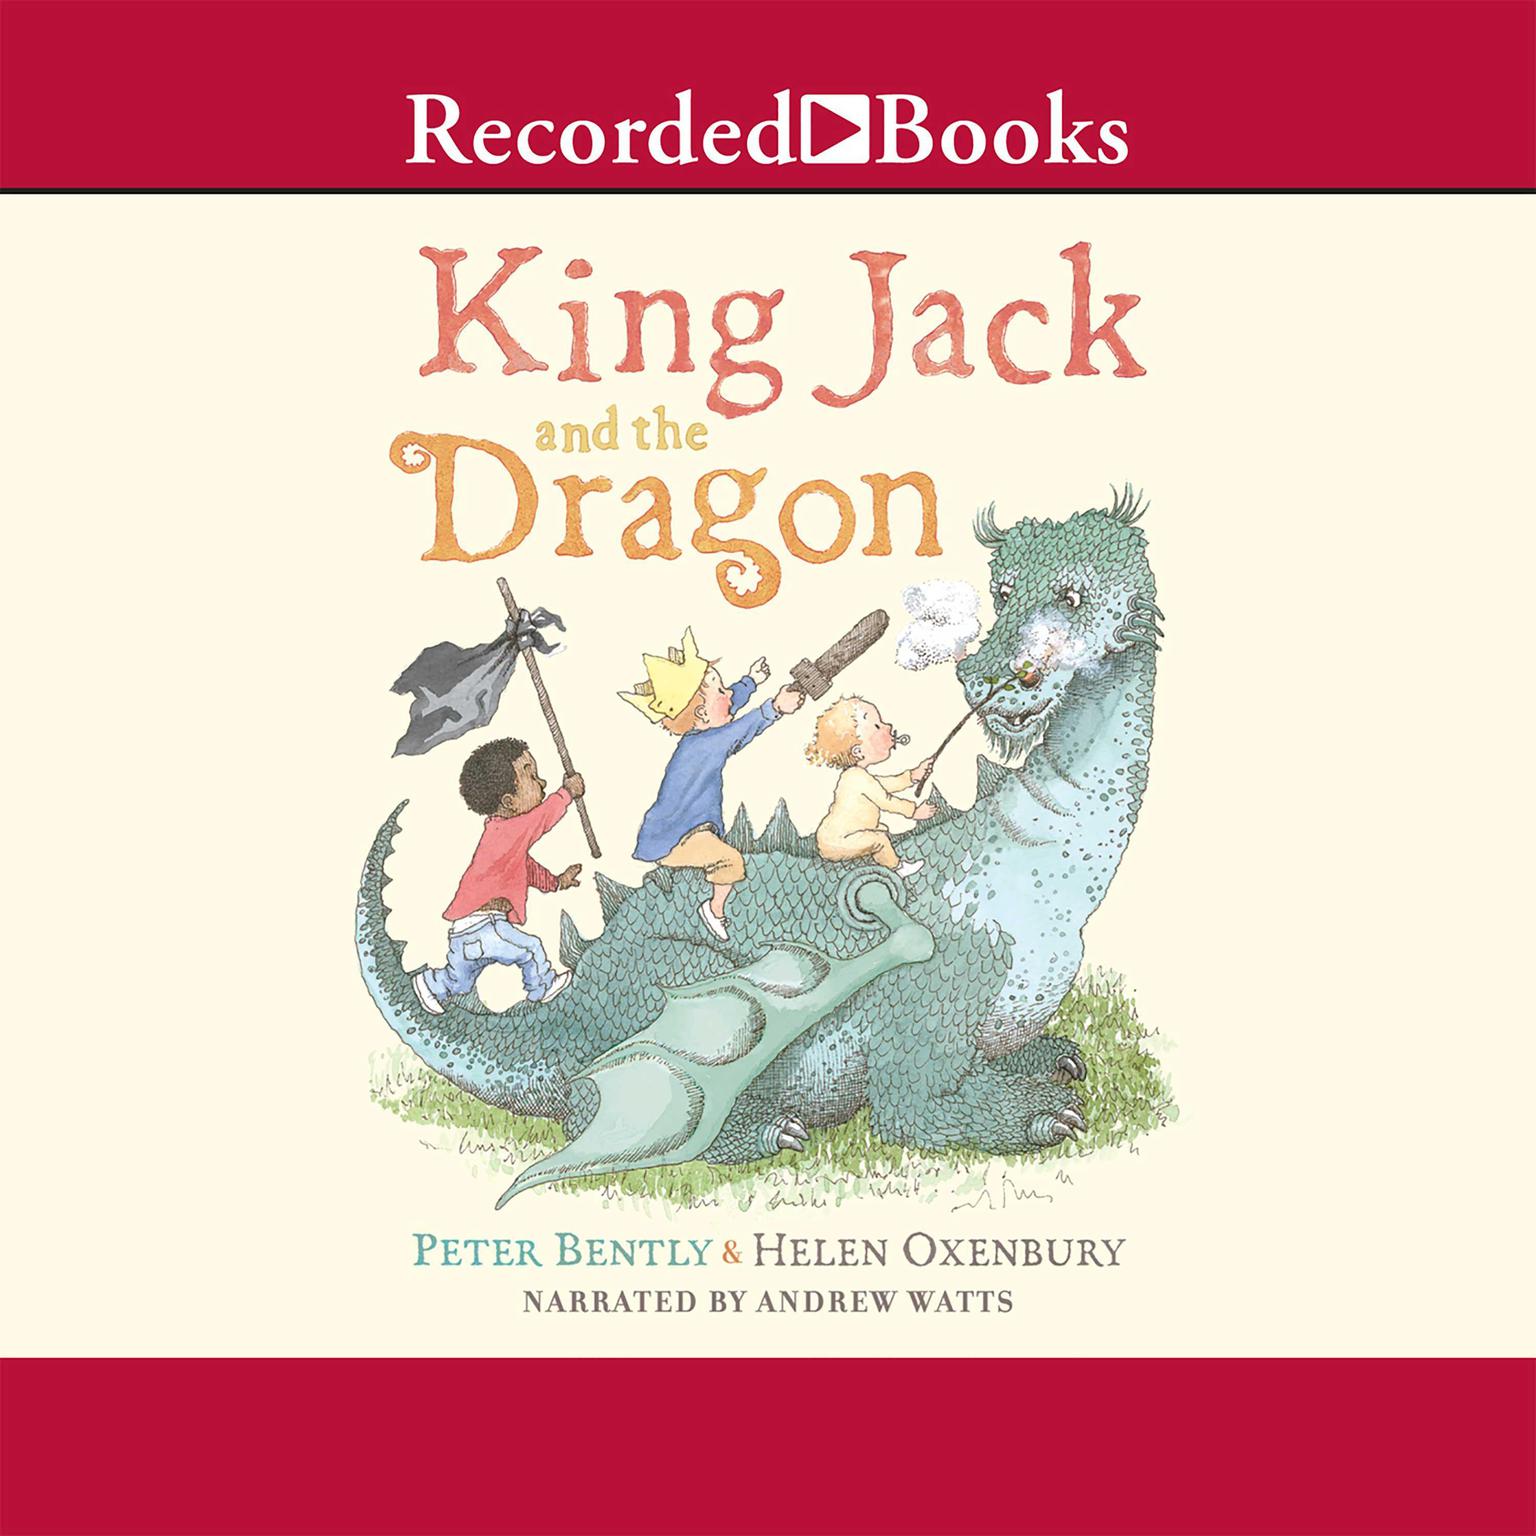 King Jack and the Dragon Audiobook, by Peter Bently